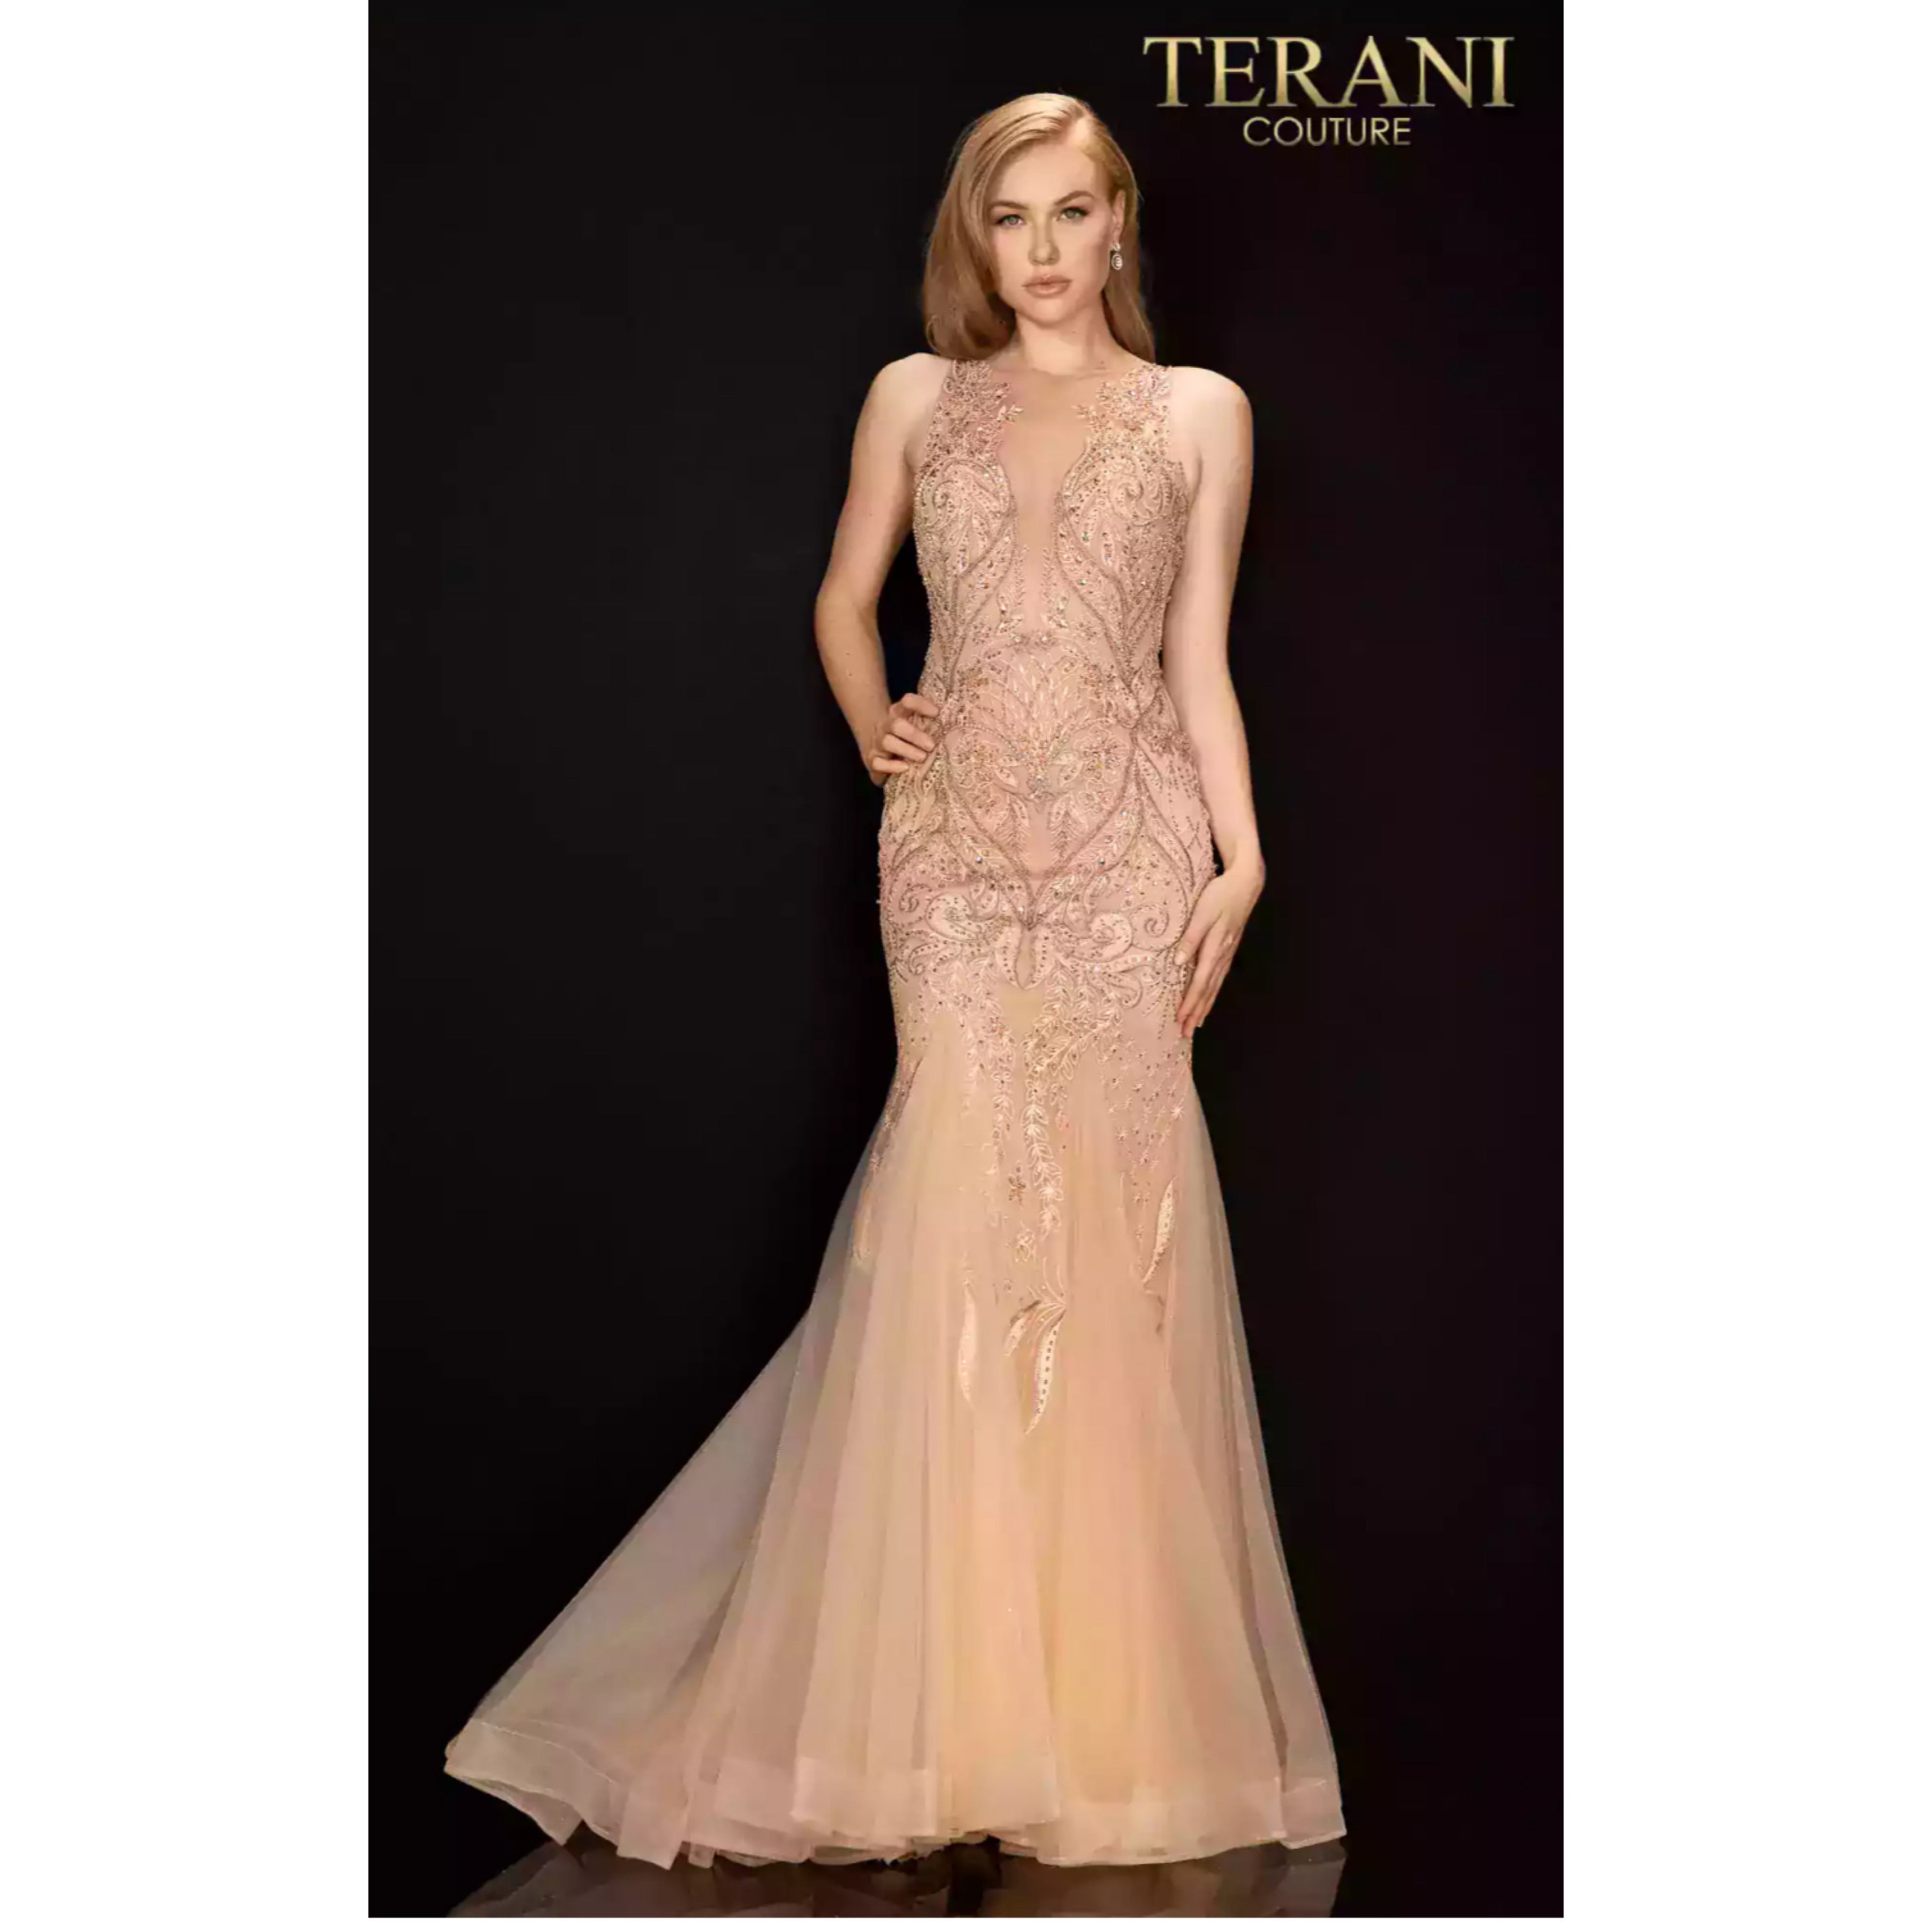 Terani rose gold dress, size 10, NEW WITH TAGS!